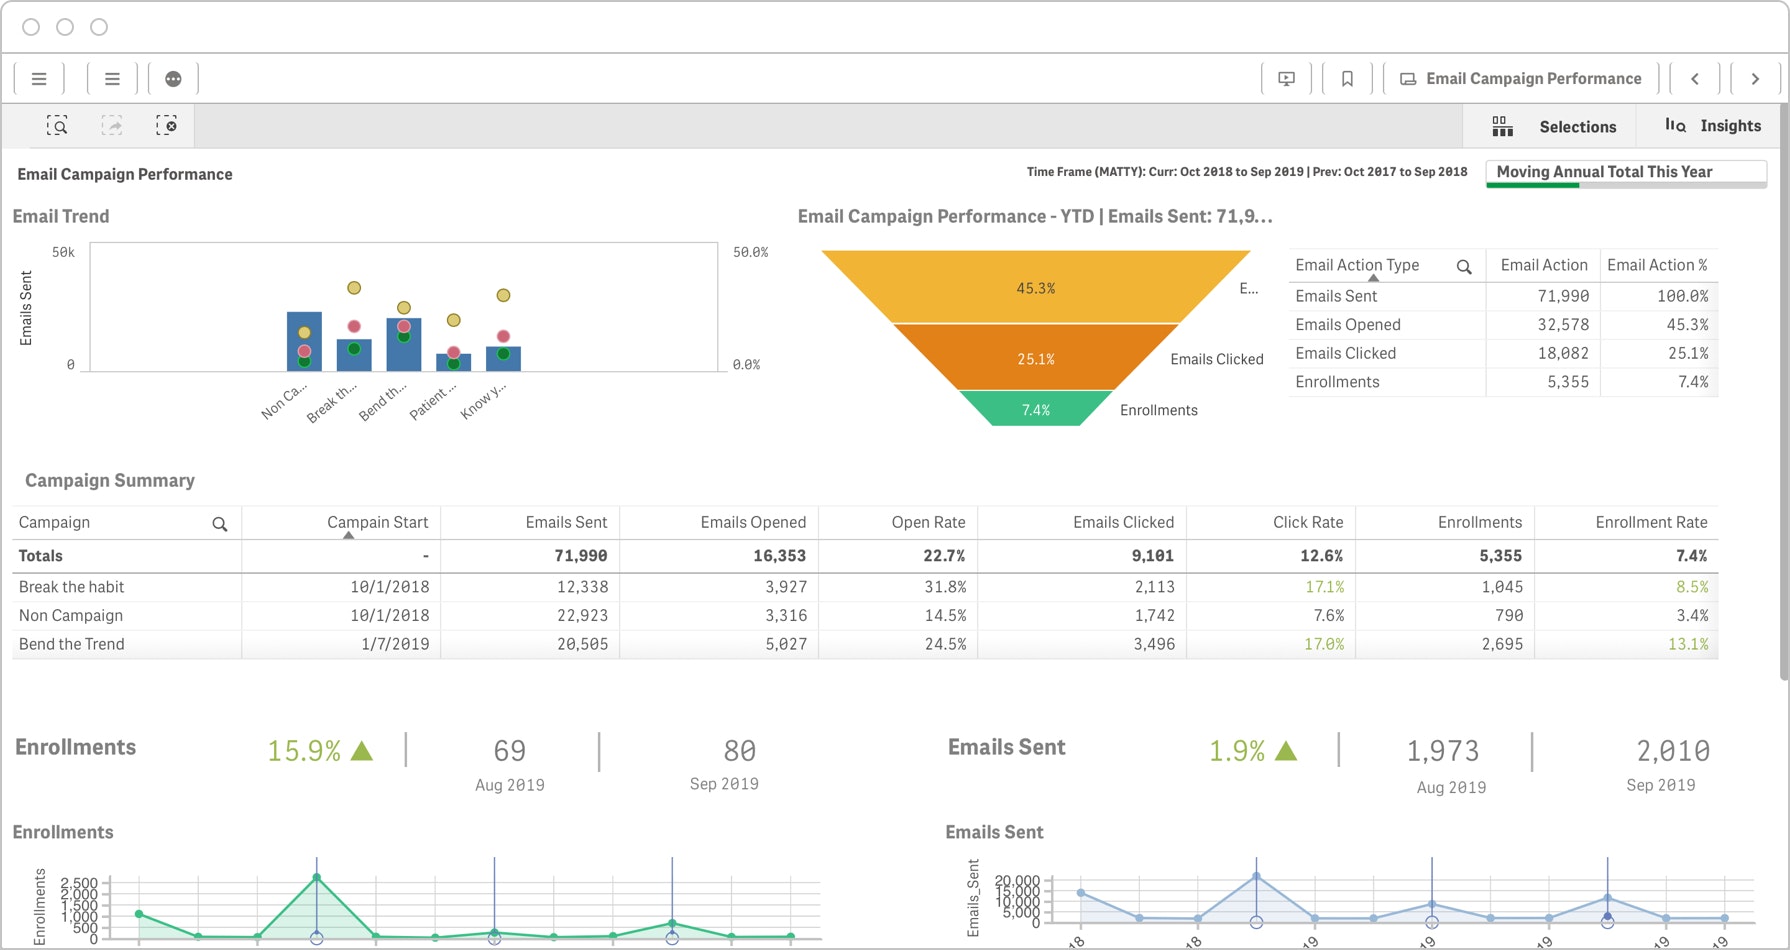 This closed-loop marketing dashboard provides an in-depth view of the full conversion funnel.